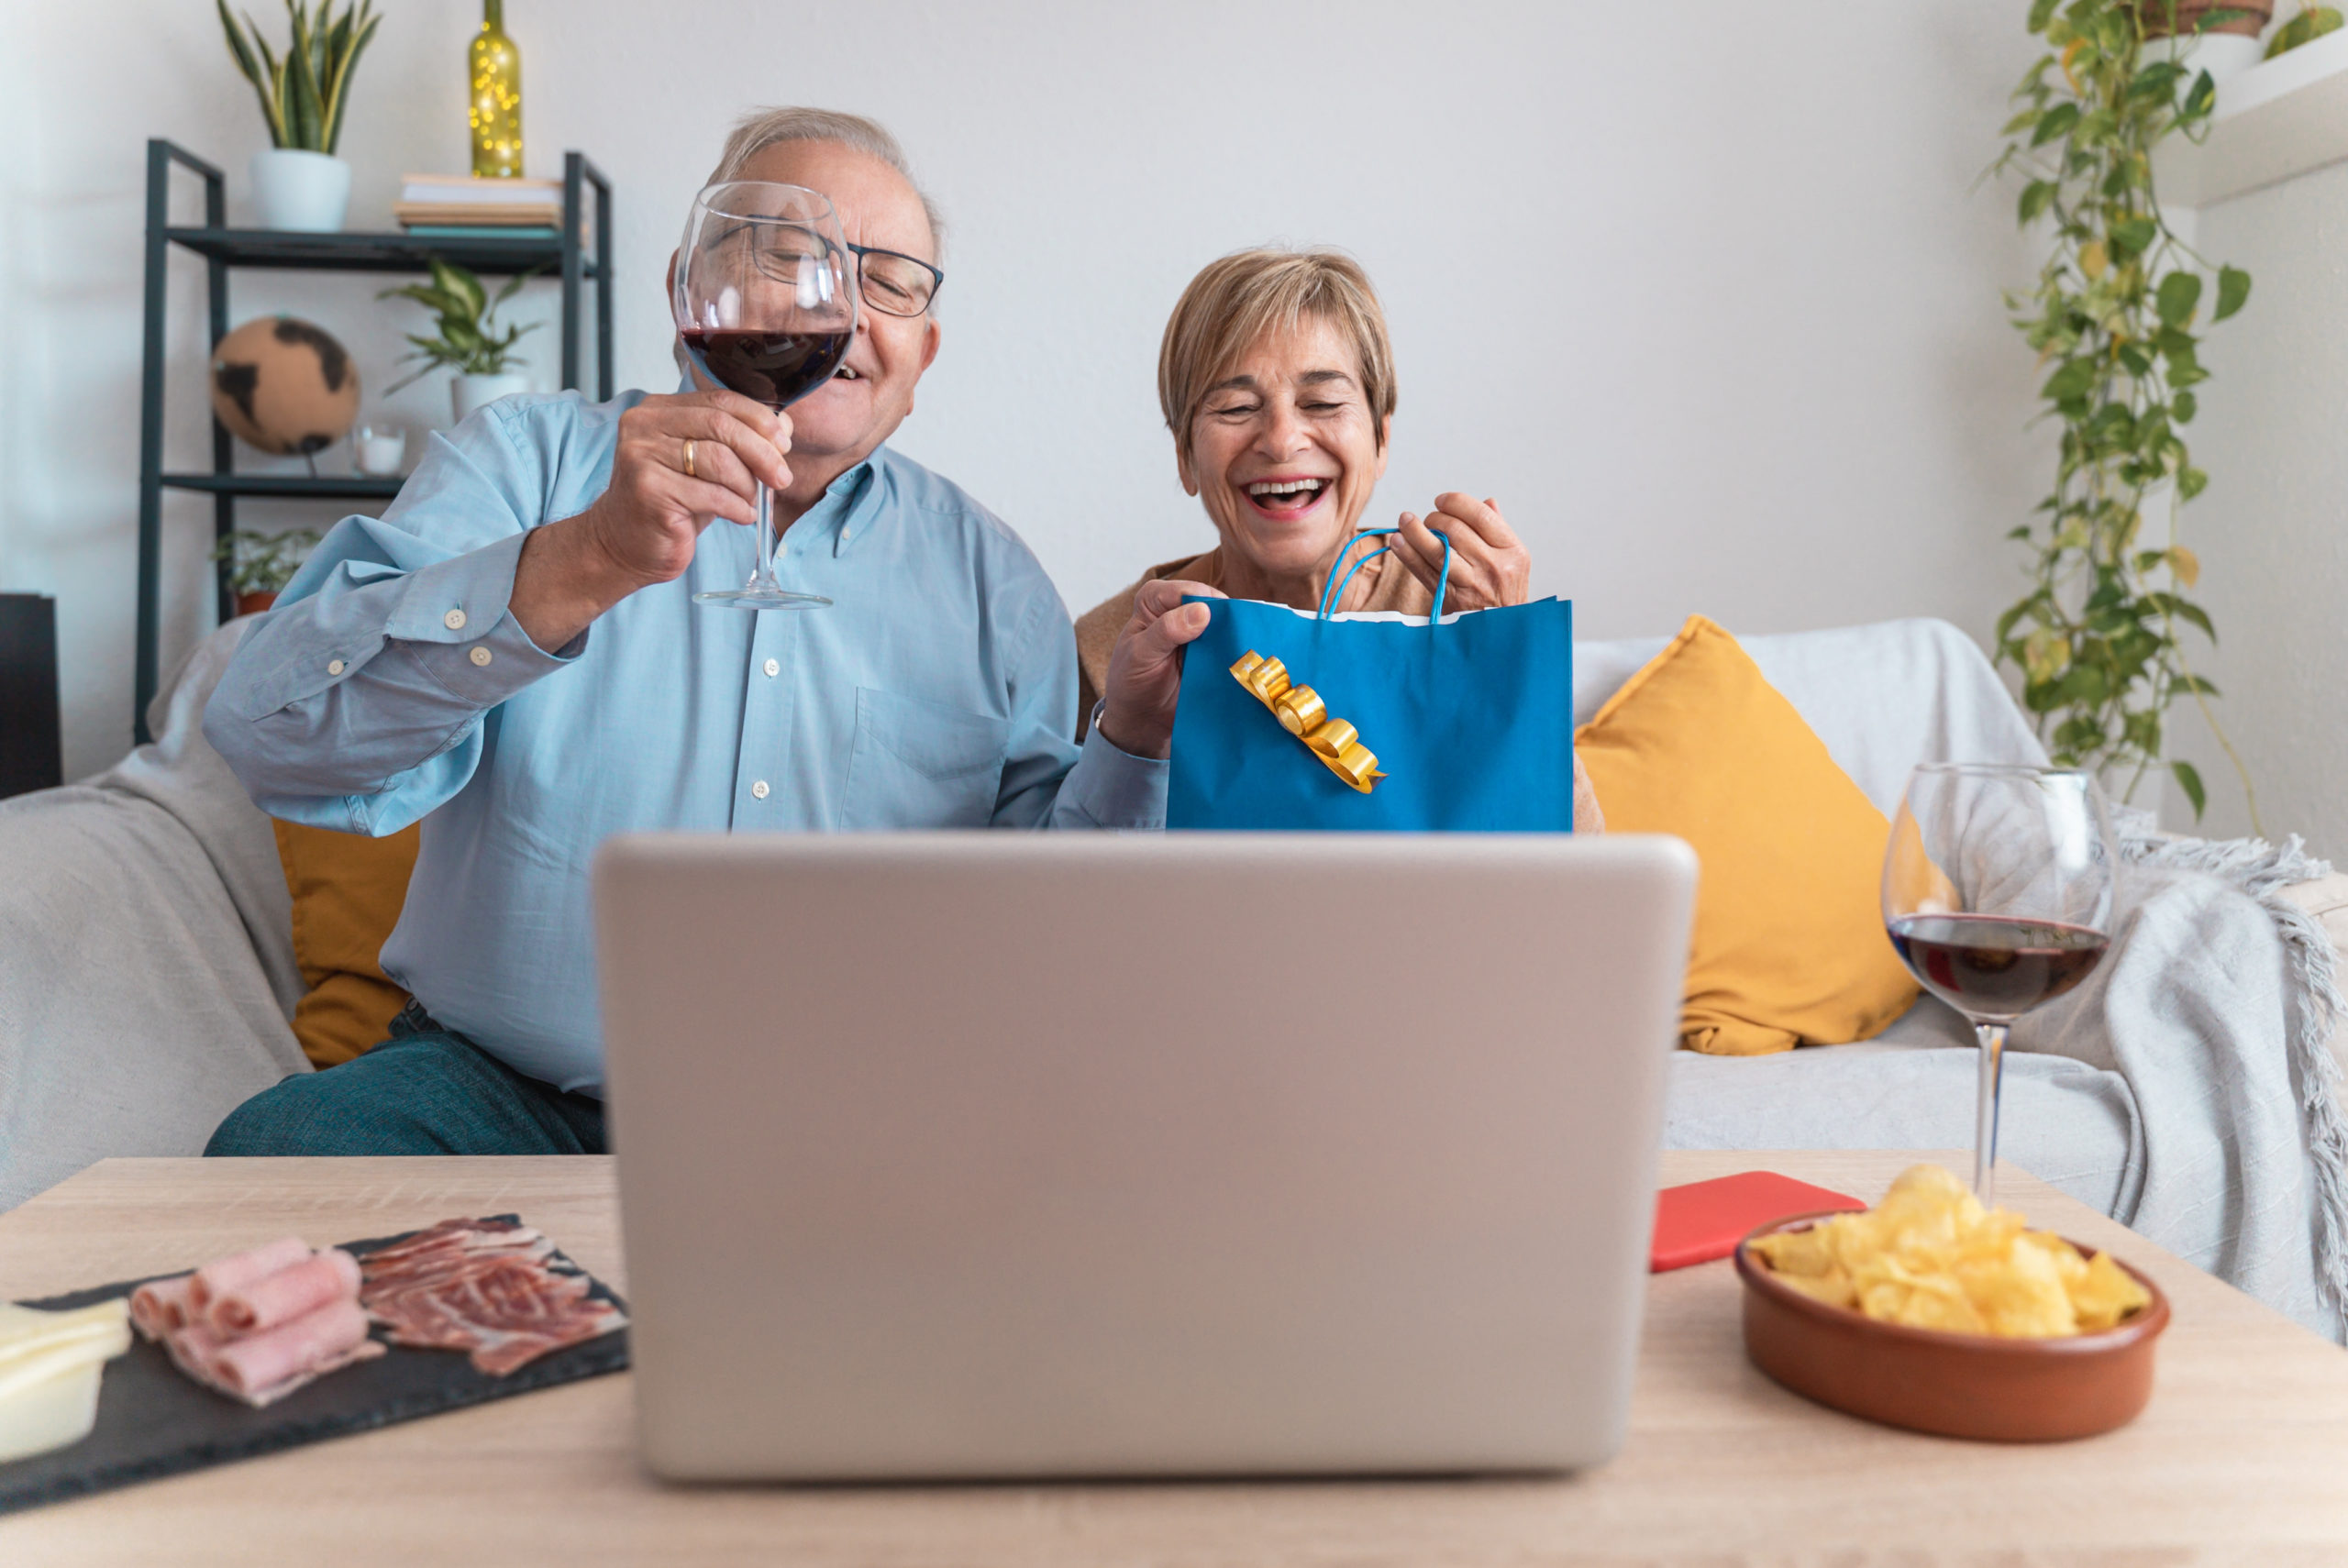 Happy senior couple celebrating with a toast with wine on video call to celebrate christmas or birthday during coronavirus outbreak - Tecnology and family party concept - Focus on gift